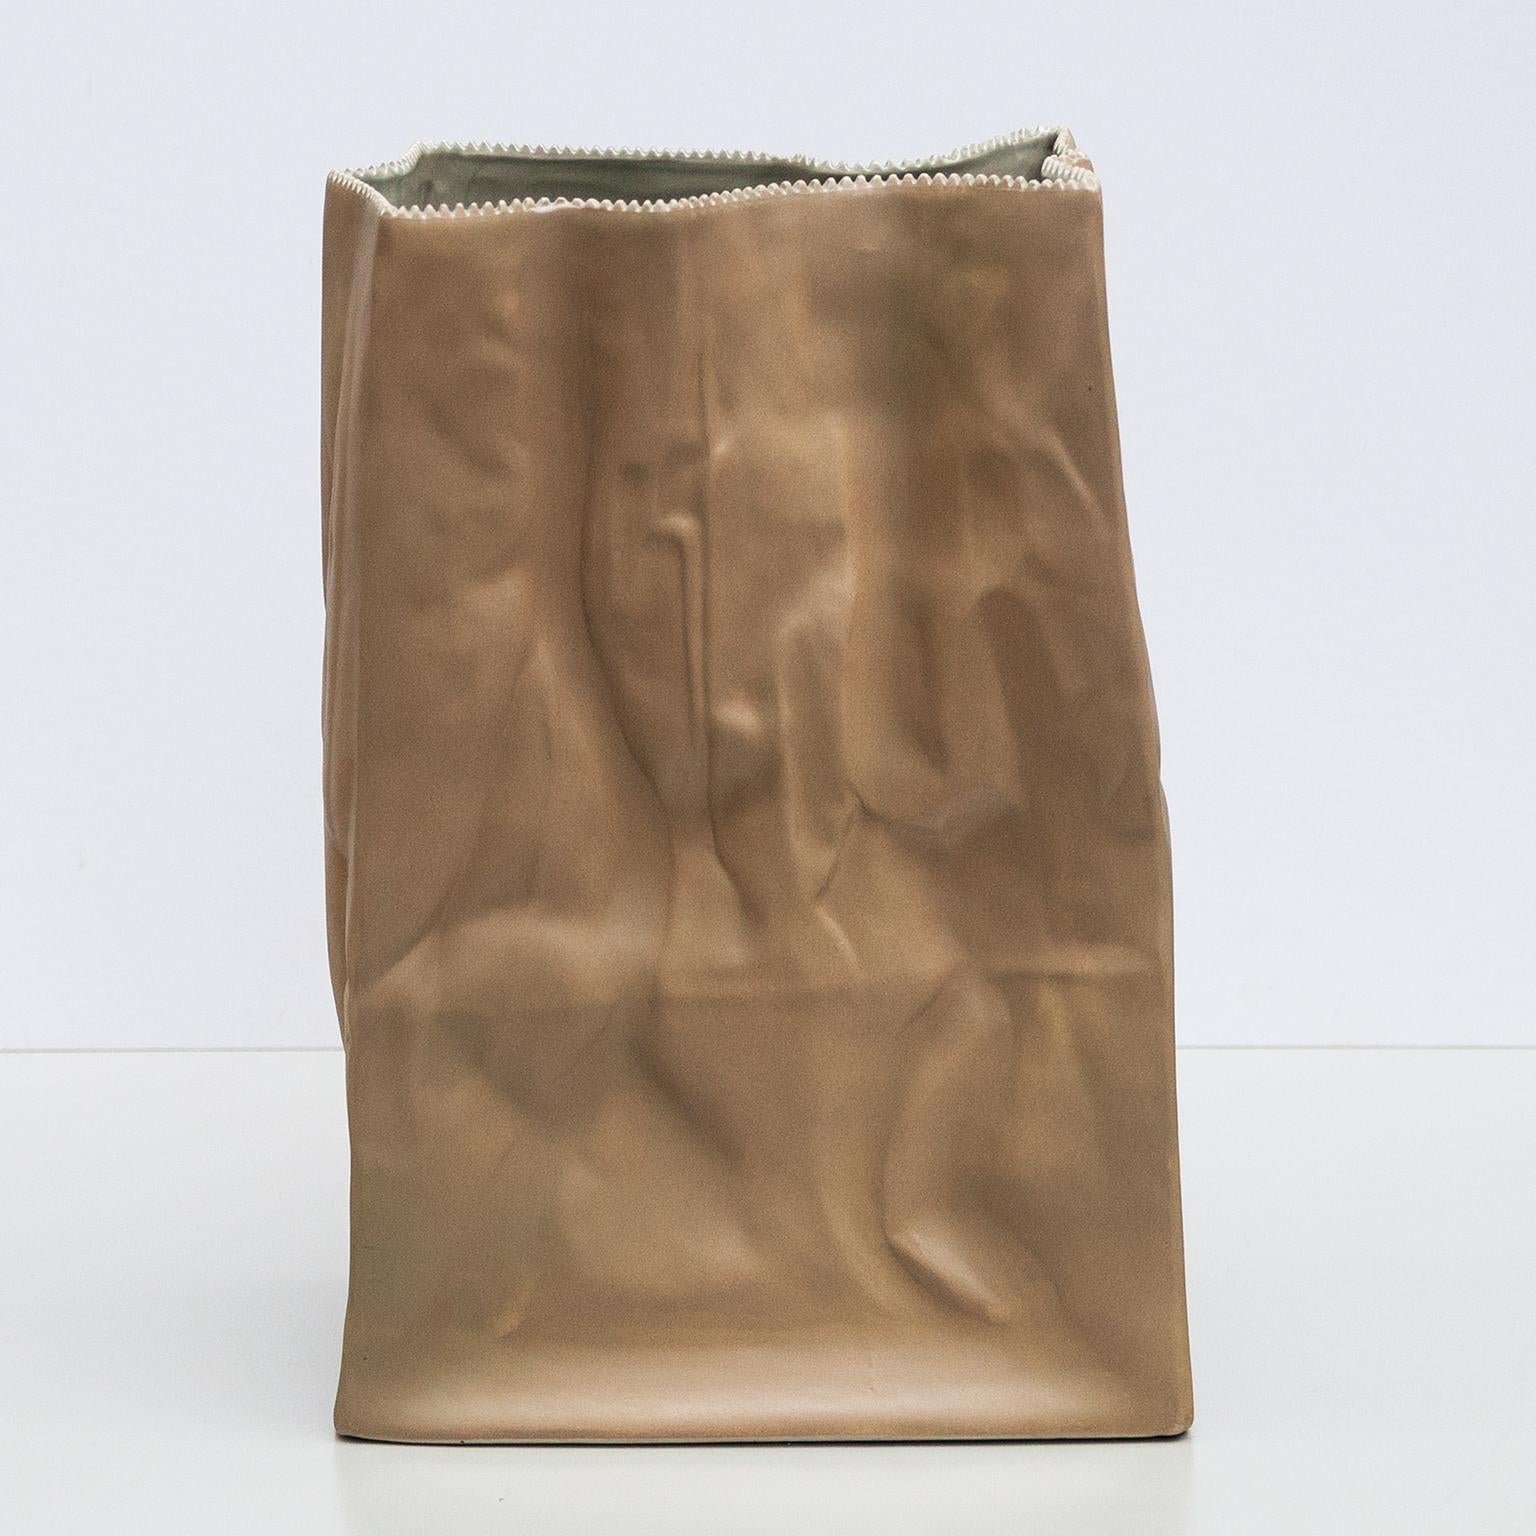 Rare large paper bag vase designed by Tapio Wirkkala and manufactured by Rosenthal, Germany 1977. This vase is made of porcelain (stoneware) and looks like a paper bag. The vase is made in the pop art period and it is very decorative especially in